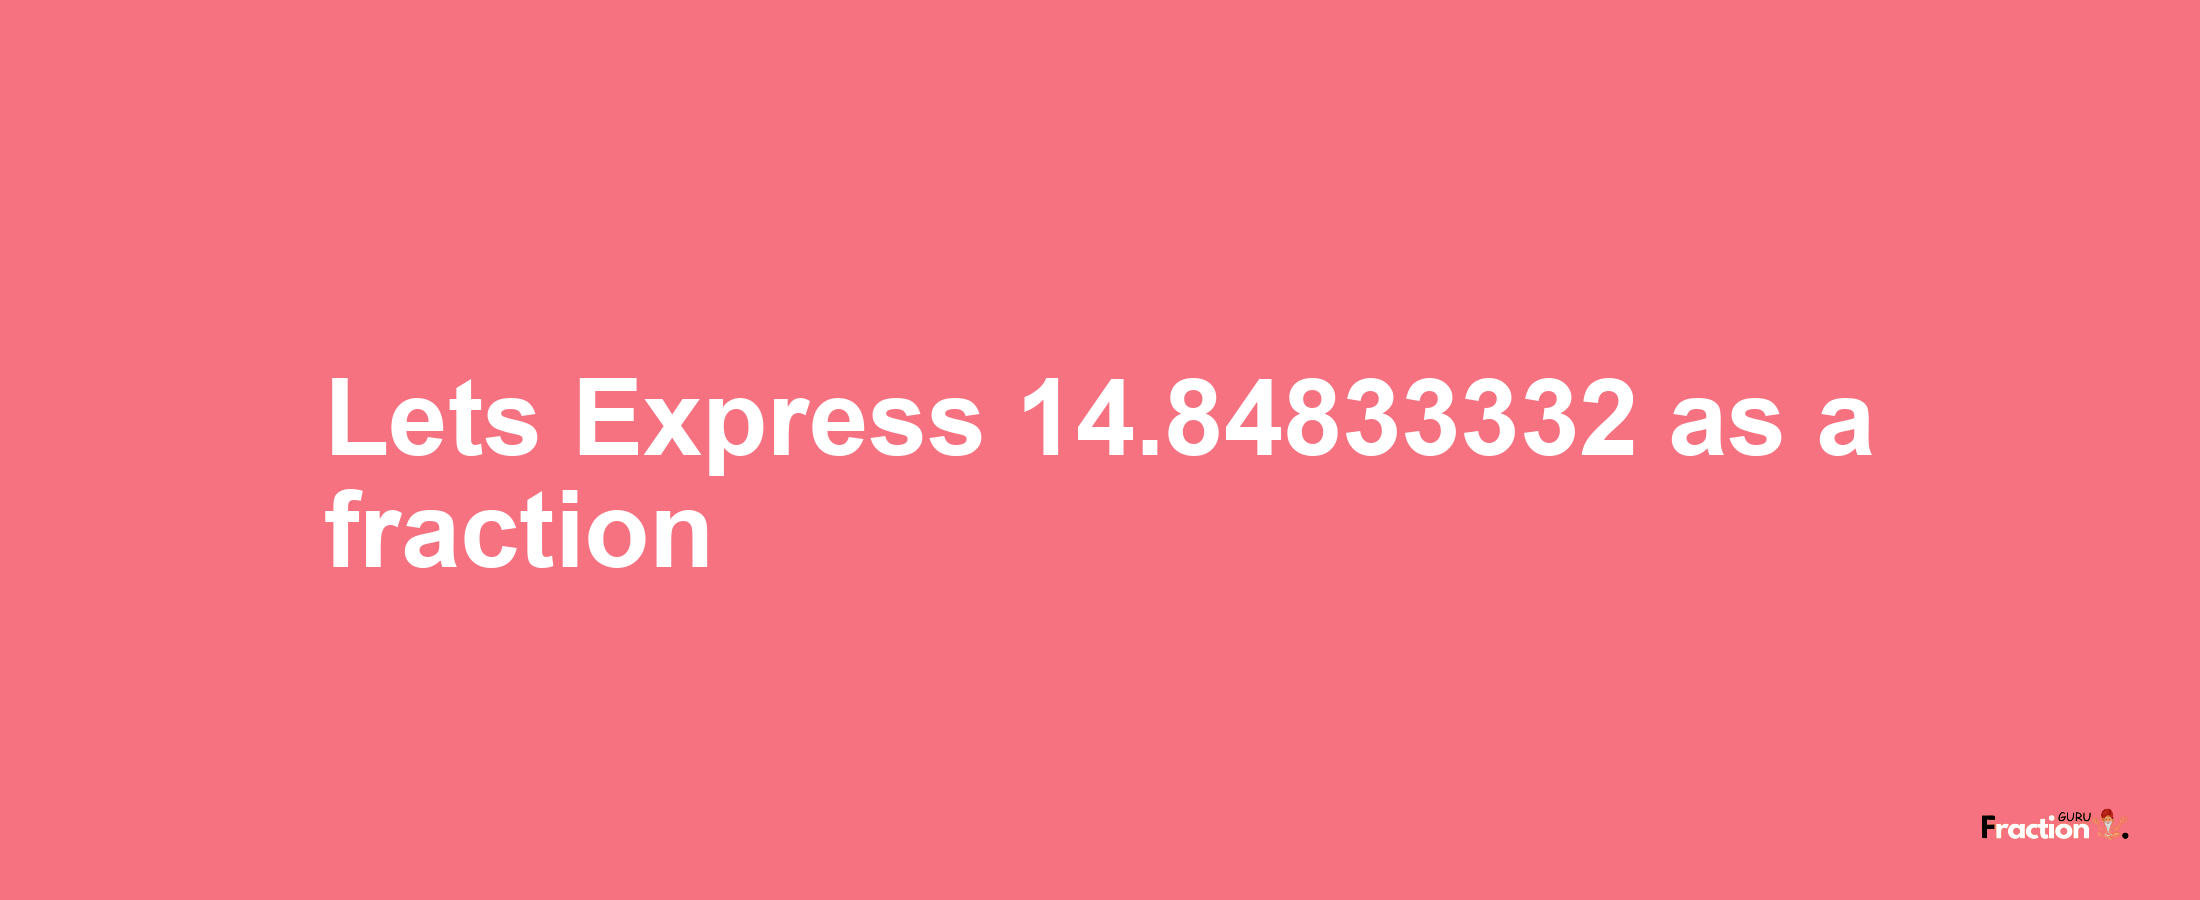 Lets Express 14.84833332 as afraction